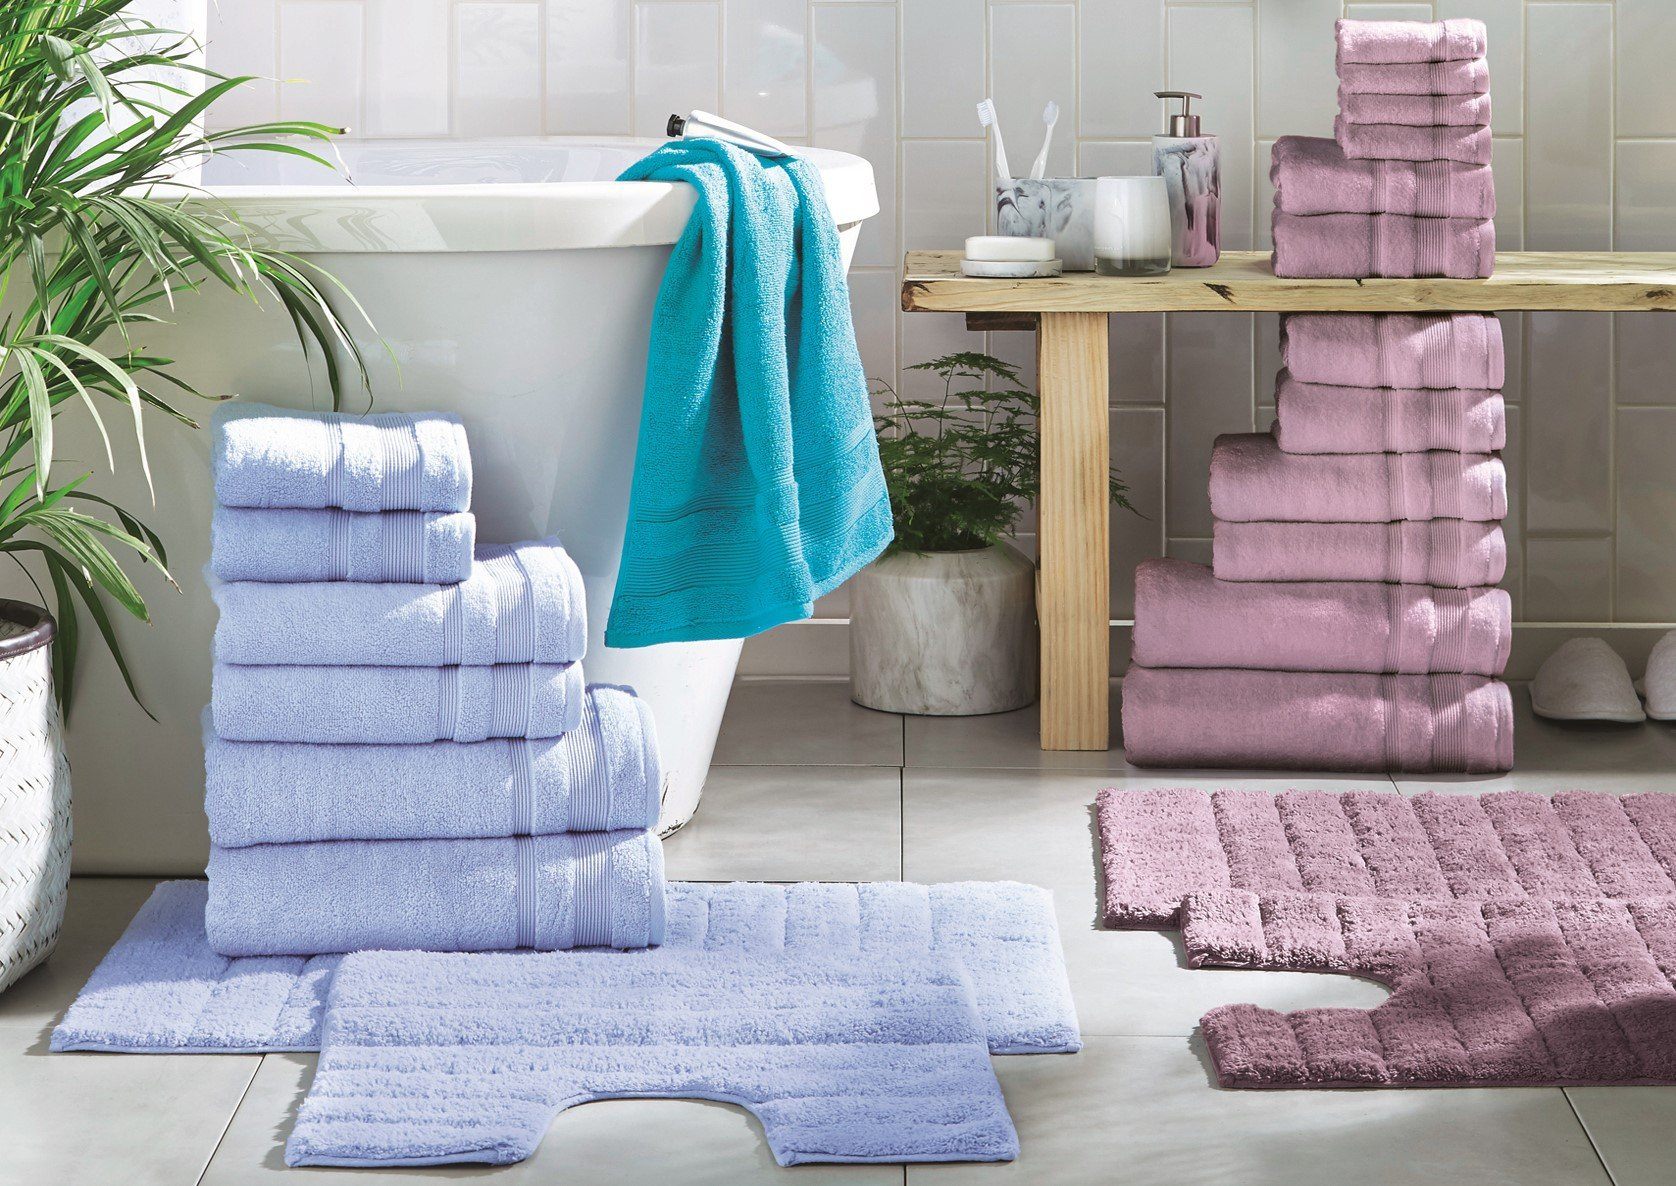 What are the best bath towels for you?